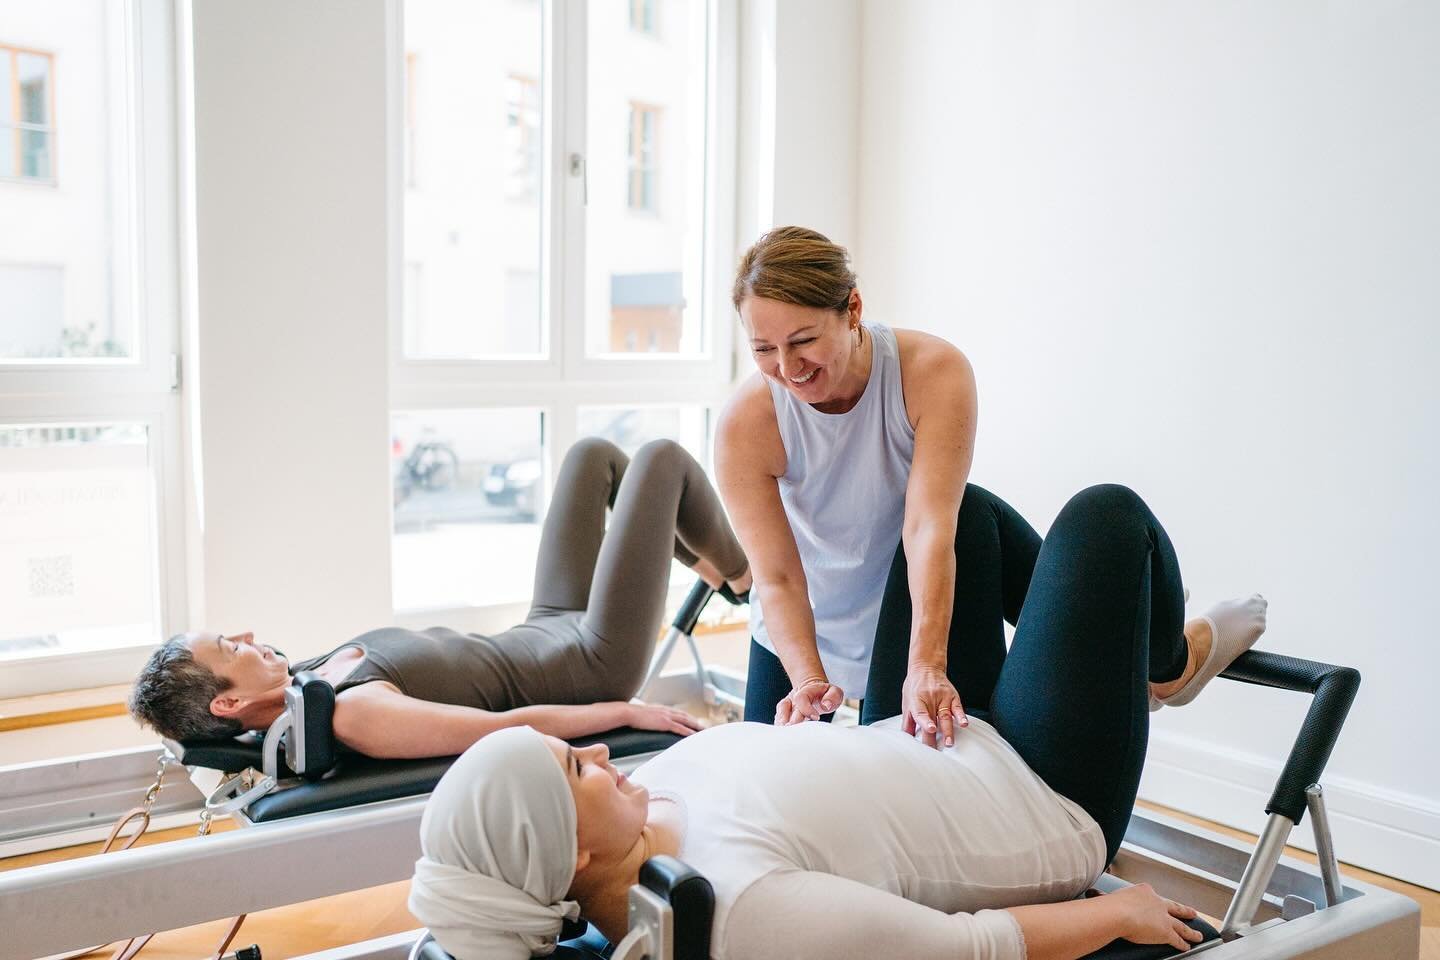 In a duet, you train as a couple on the Pilates equipment with a trainer of your choice. 

The content will be tailored to your common goals to make the training as effective as possible. 

Dates can be arranged individually with your training partne